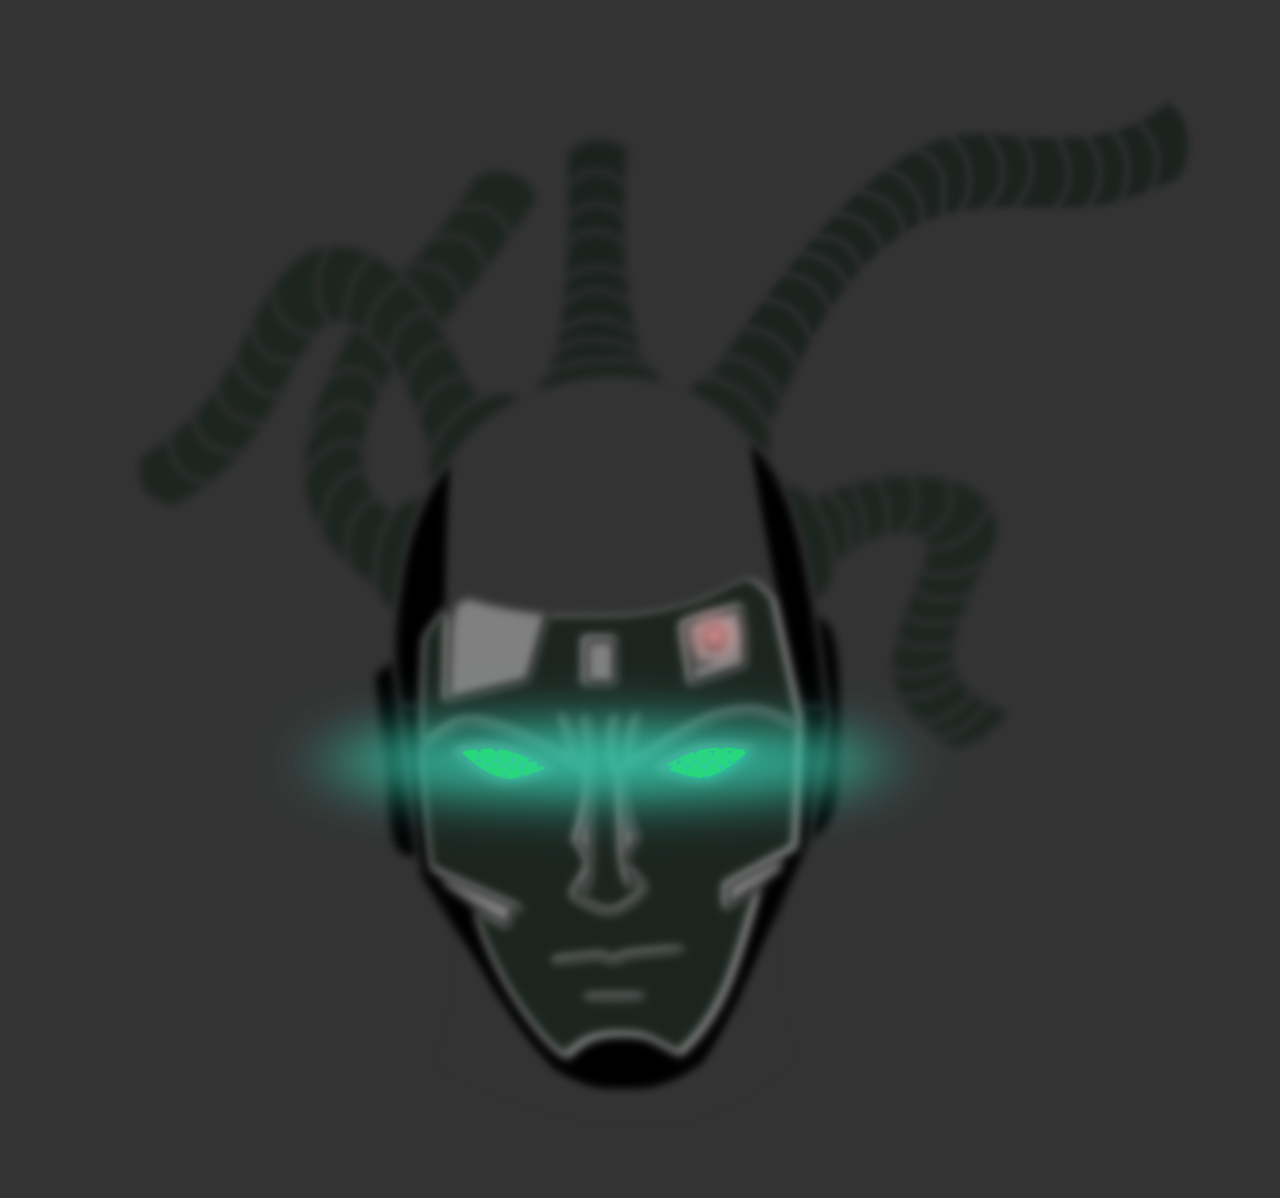 a close up of a person's face with green eyes, concept art, inspired by Android Jones, tumblr, robot icon, male medusa, 2 d render, view is centered on the robot